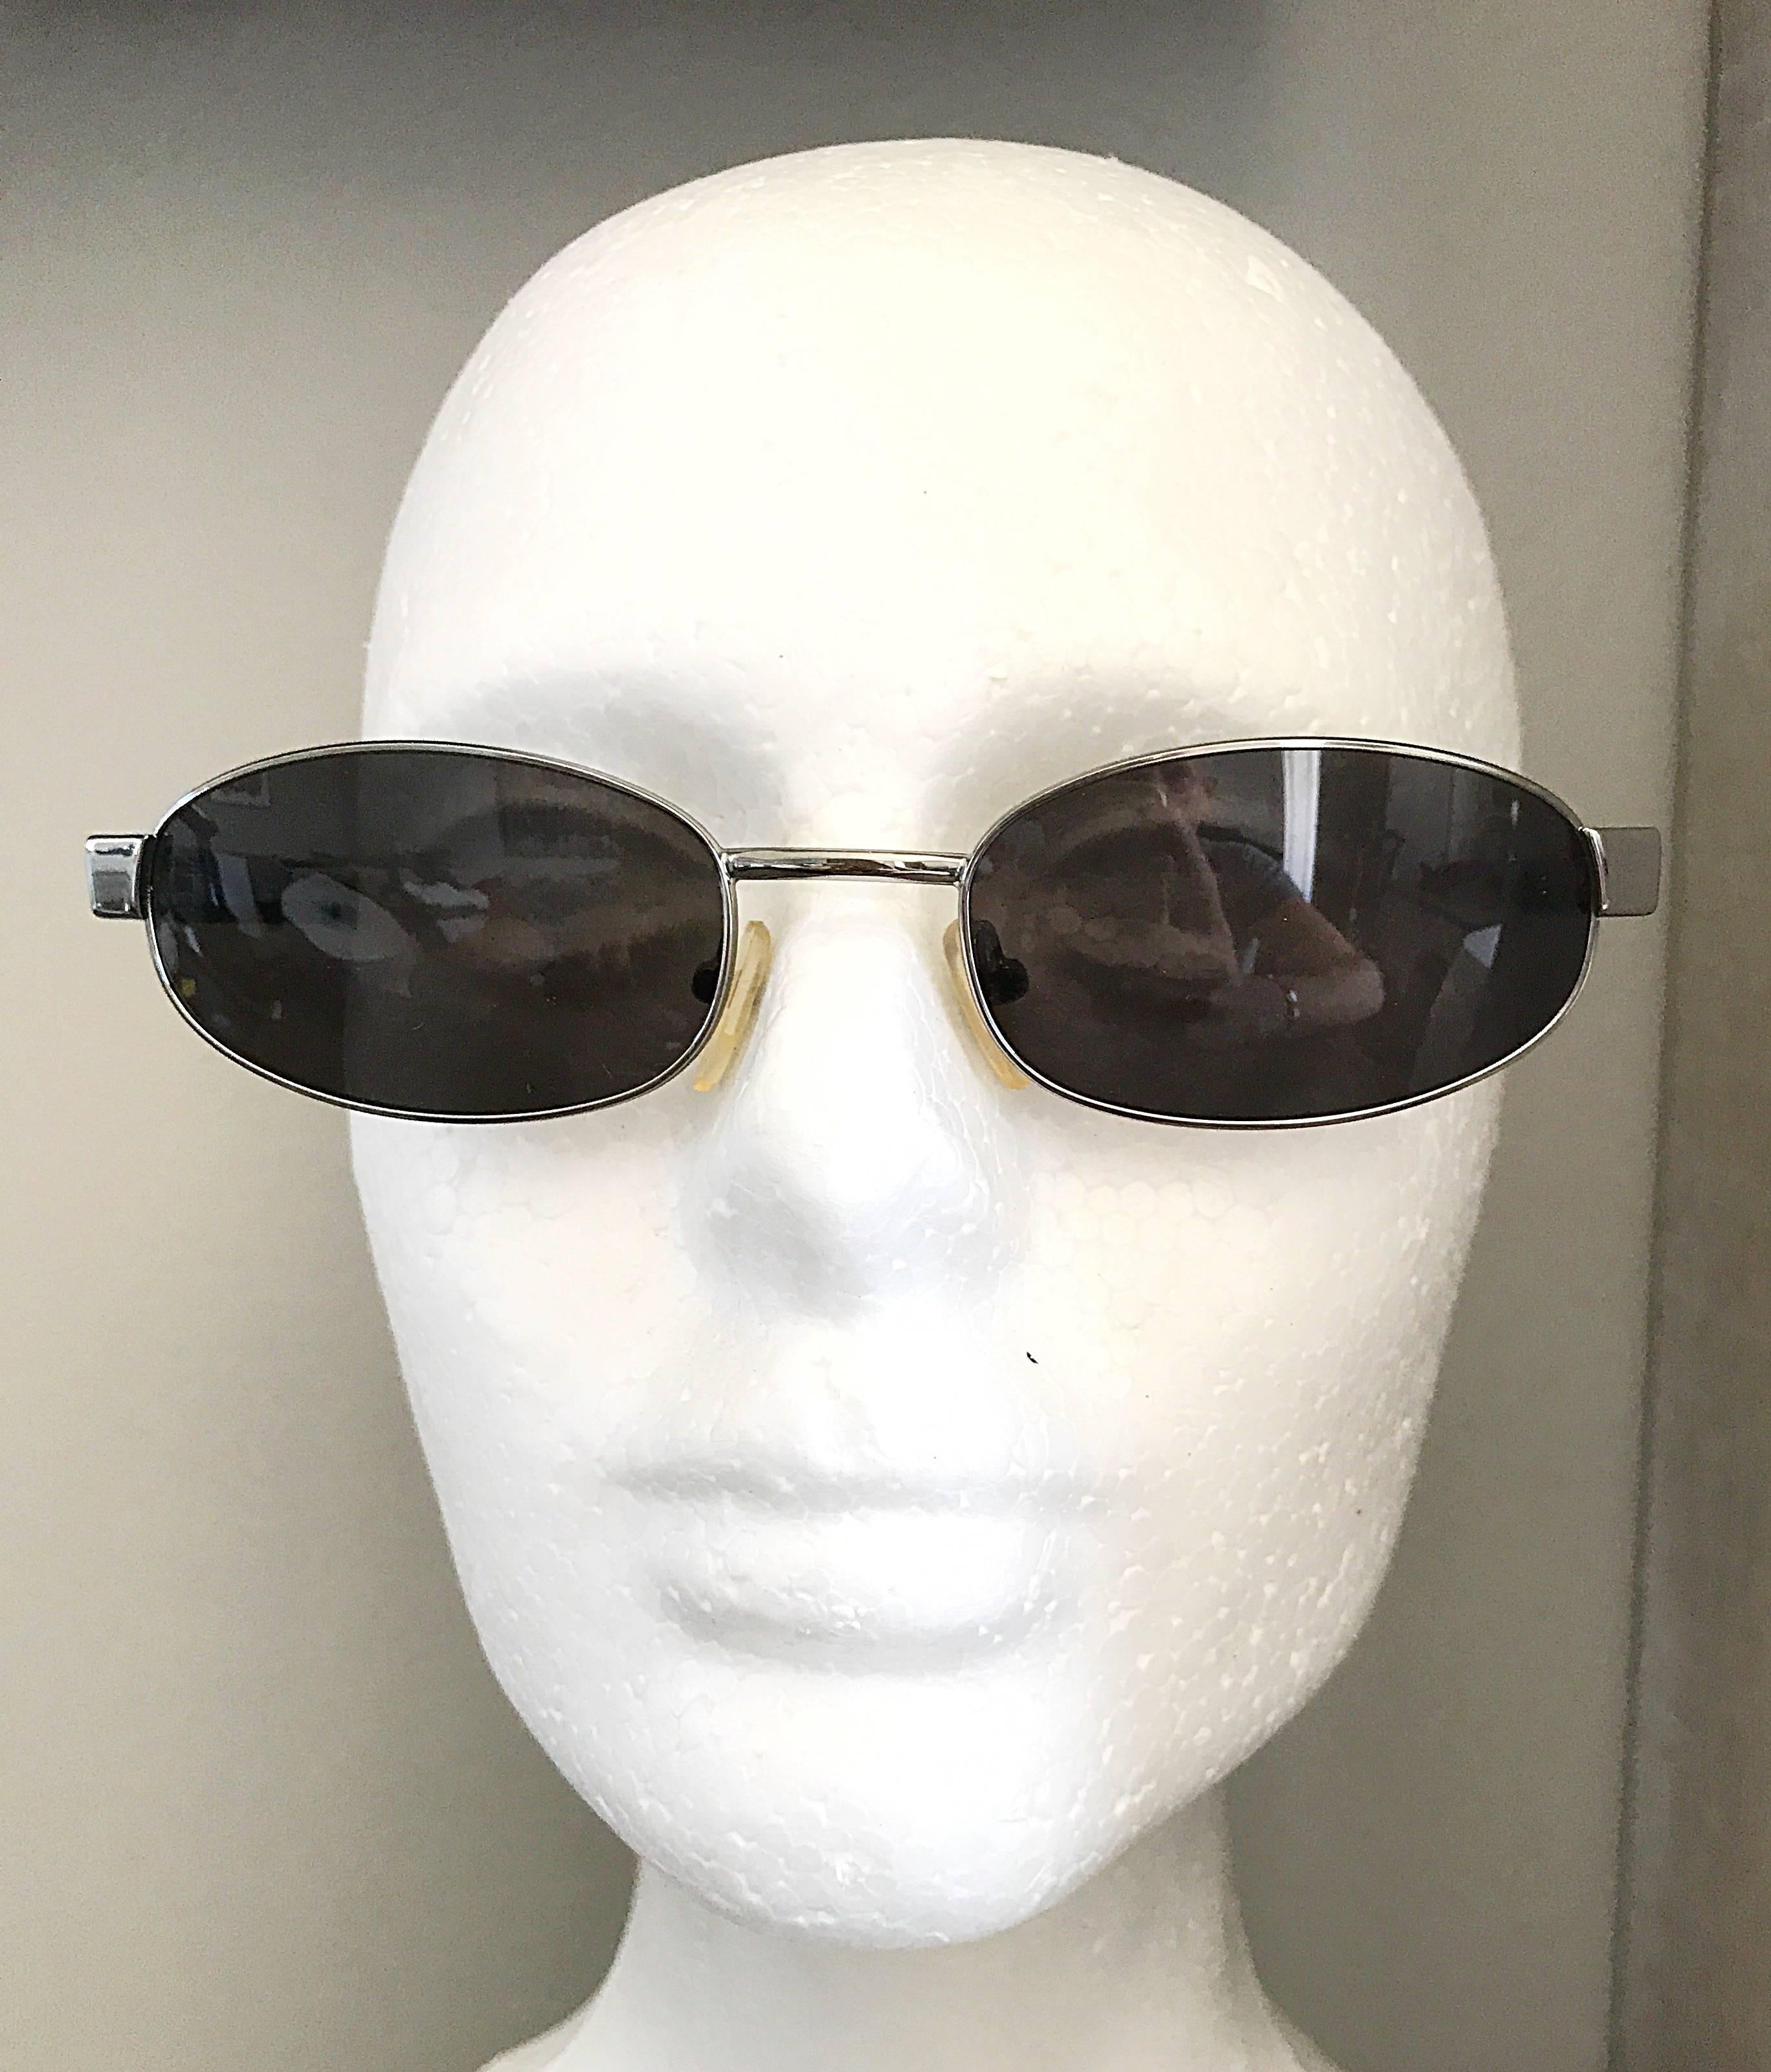 Rare TOM FORD for GUCCI sunglasses from Ford's first collection with Gucci in 1995! Features a chic oval shape that looks great on most any head shape! Hard to find black with silver nickel hardware. Style # GG 1640/S. Can easily be worn by a man or